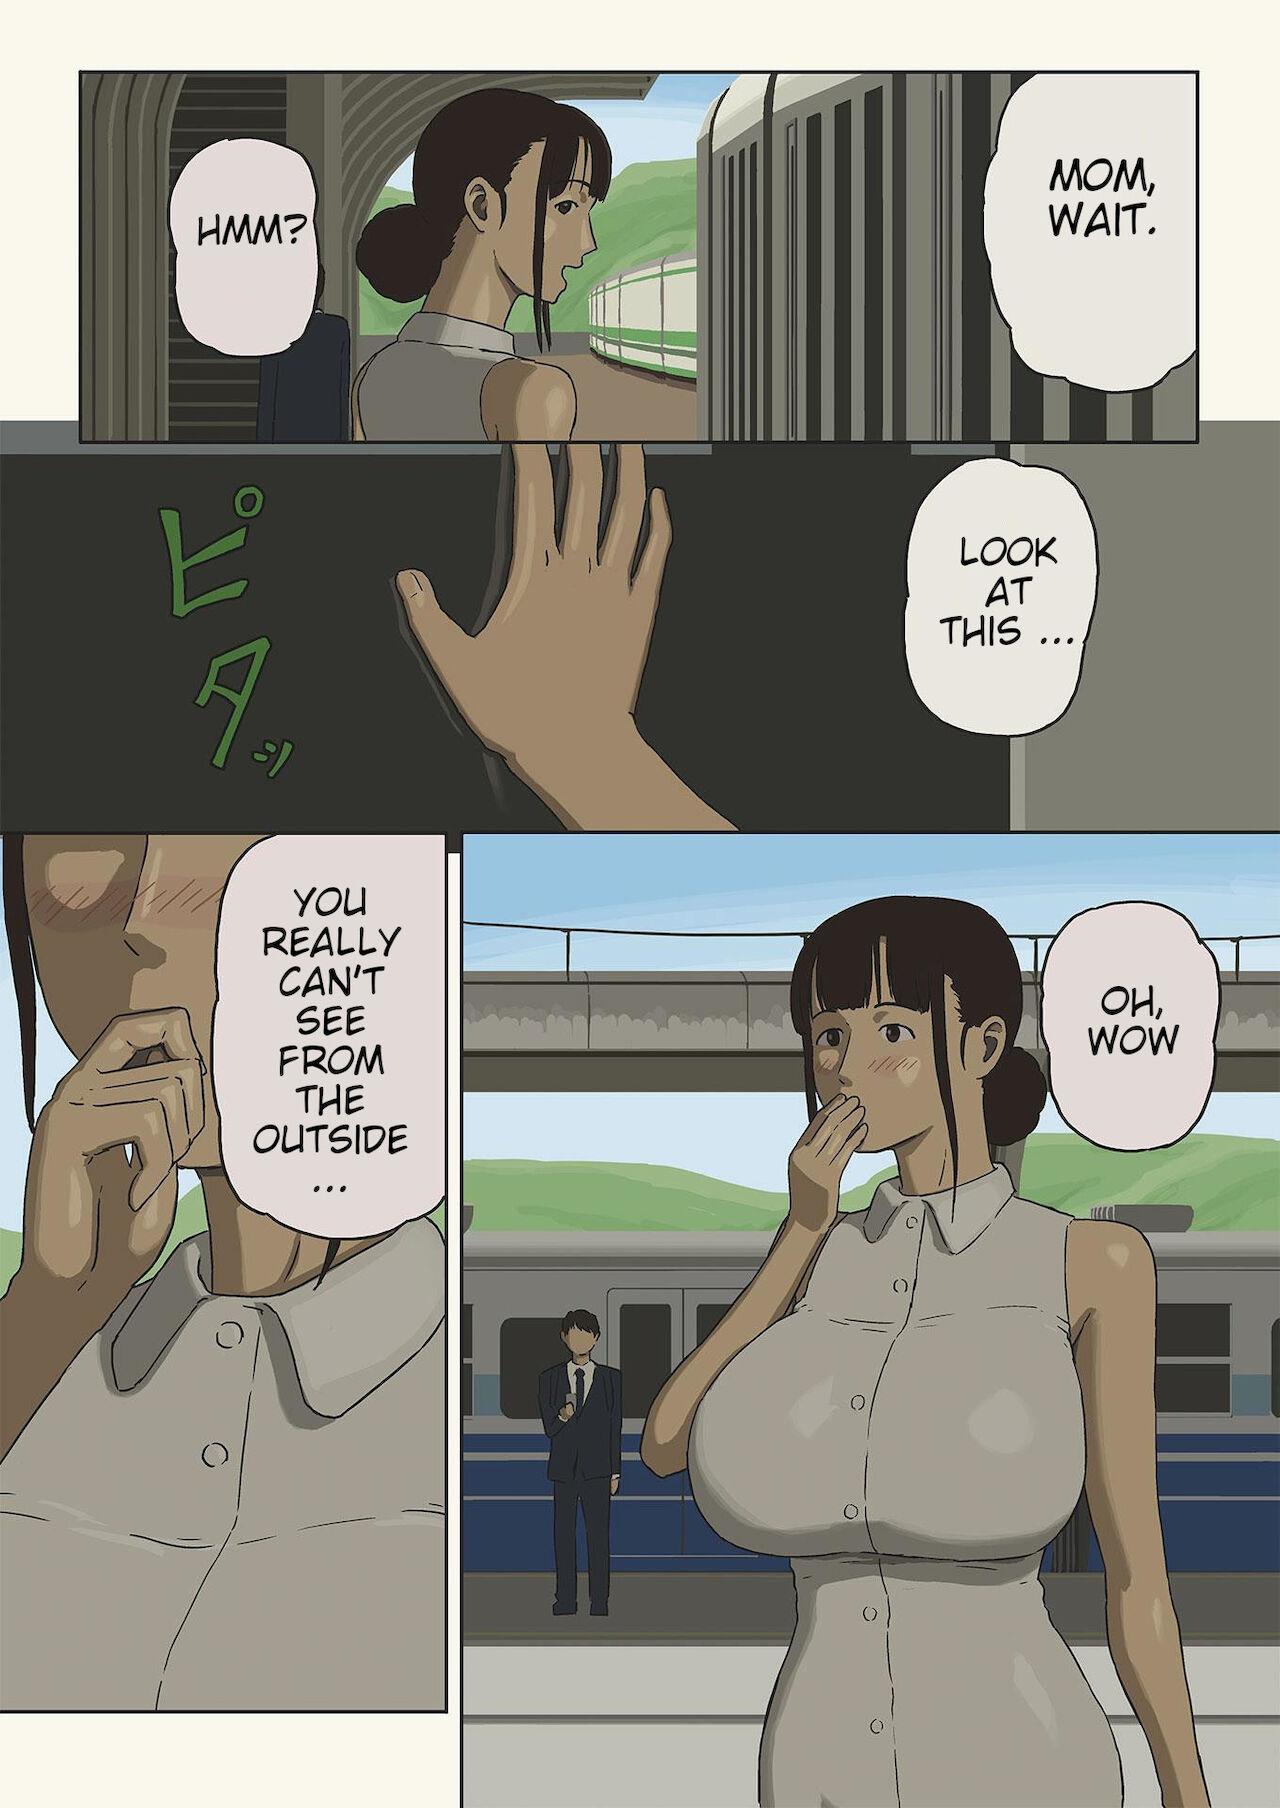 Hard Share 4 - A Parent and Child in the Window of a Train Car Seeking Love and Sex - Original Dirty - Page 4